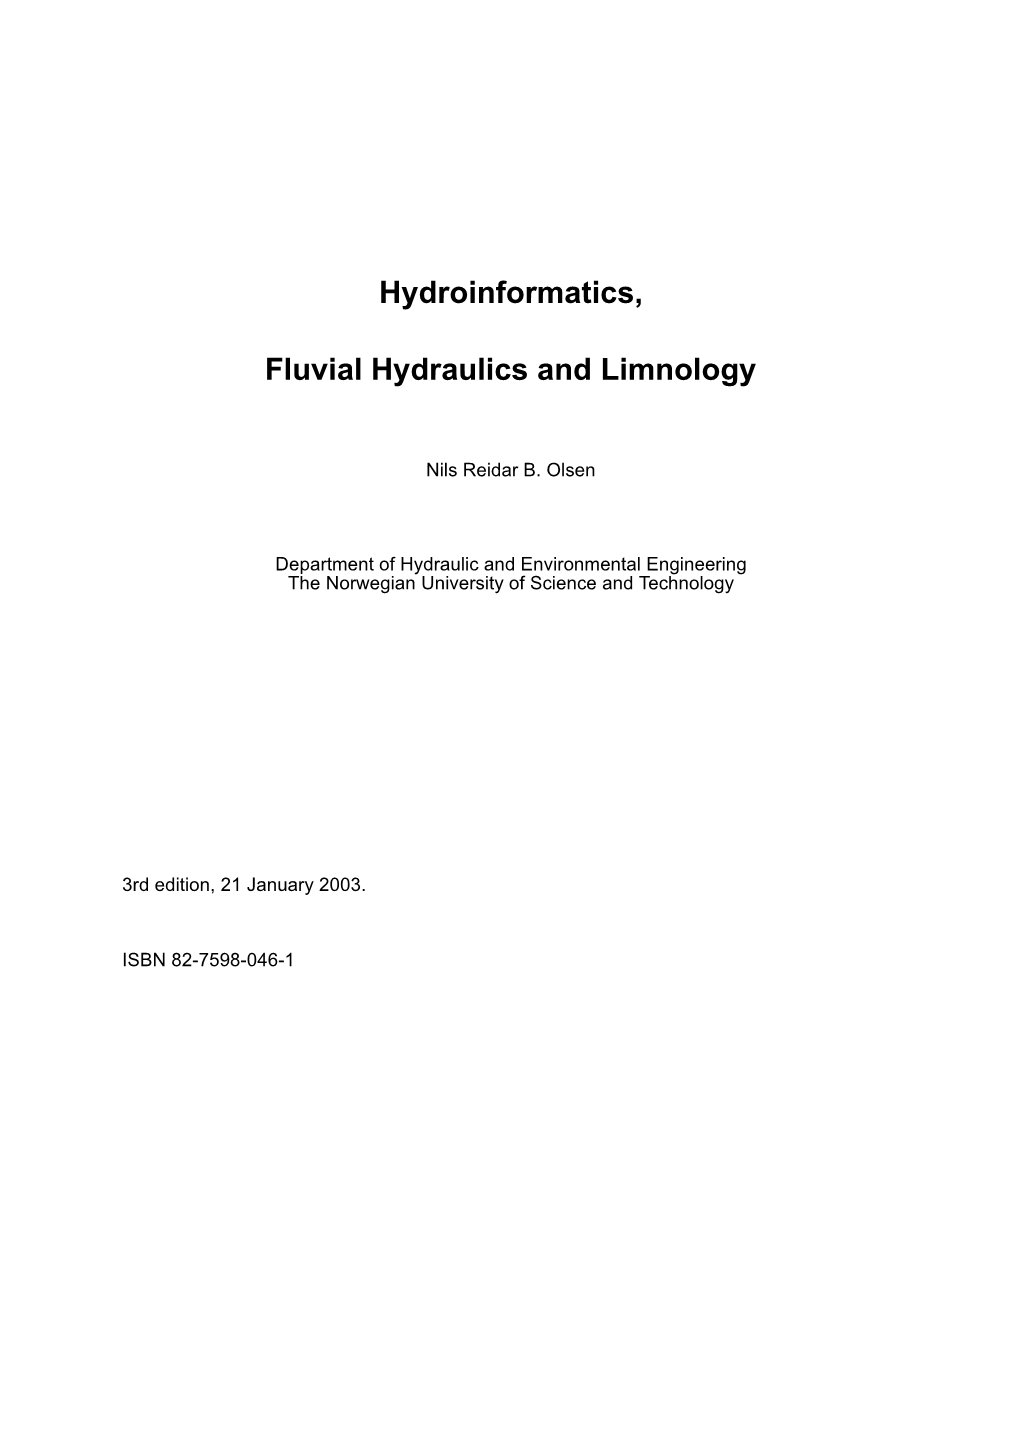 Hydroinformatics, Fluvial Hydraulics and Limnology 1